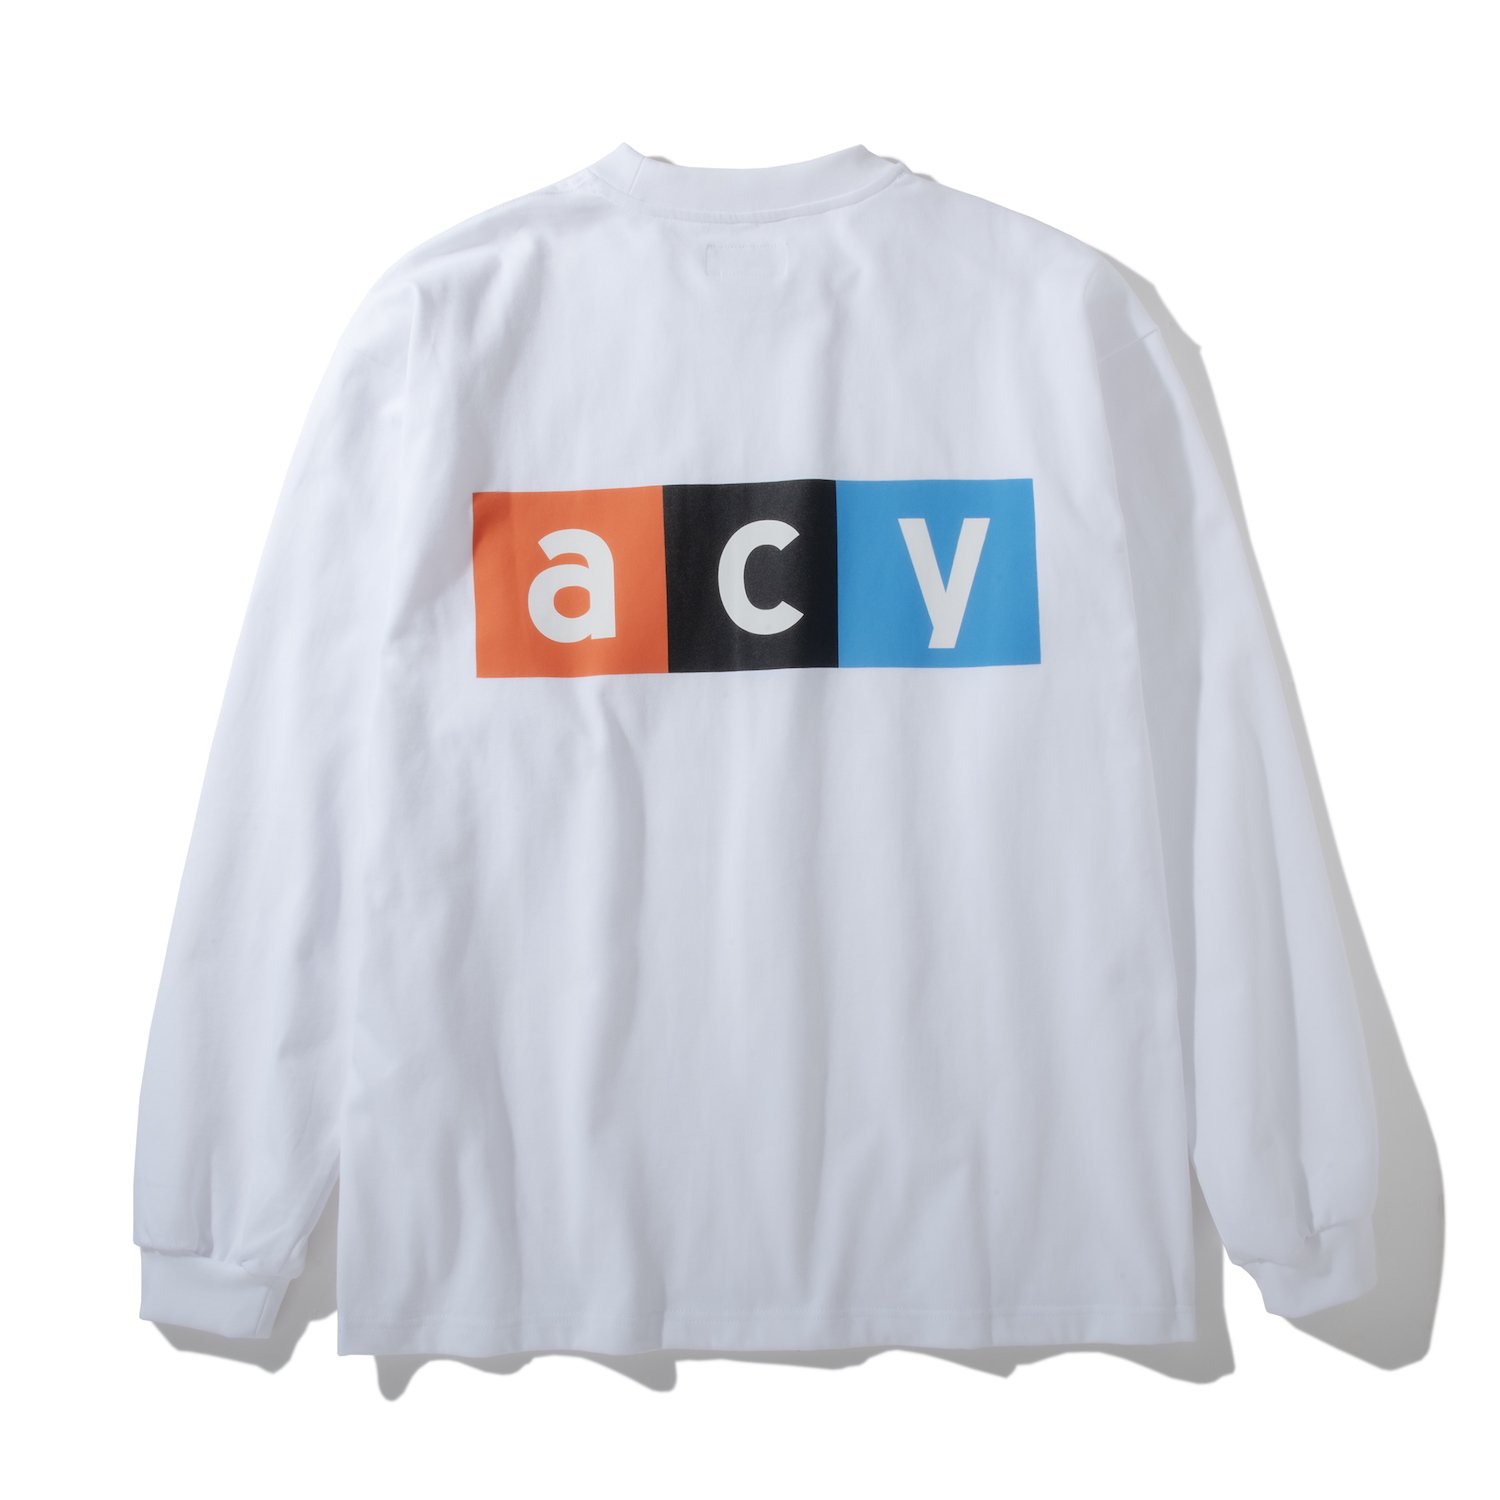 Acy<br>WAVE L/S TEE<br>